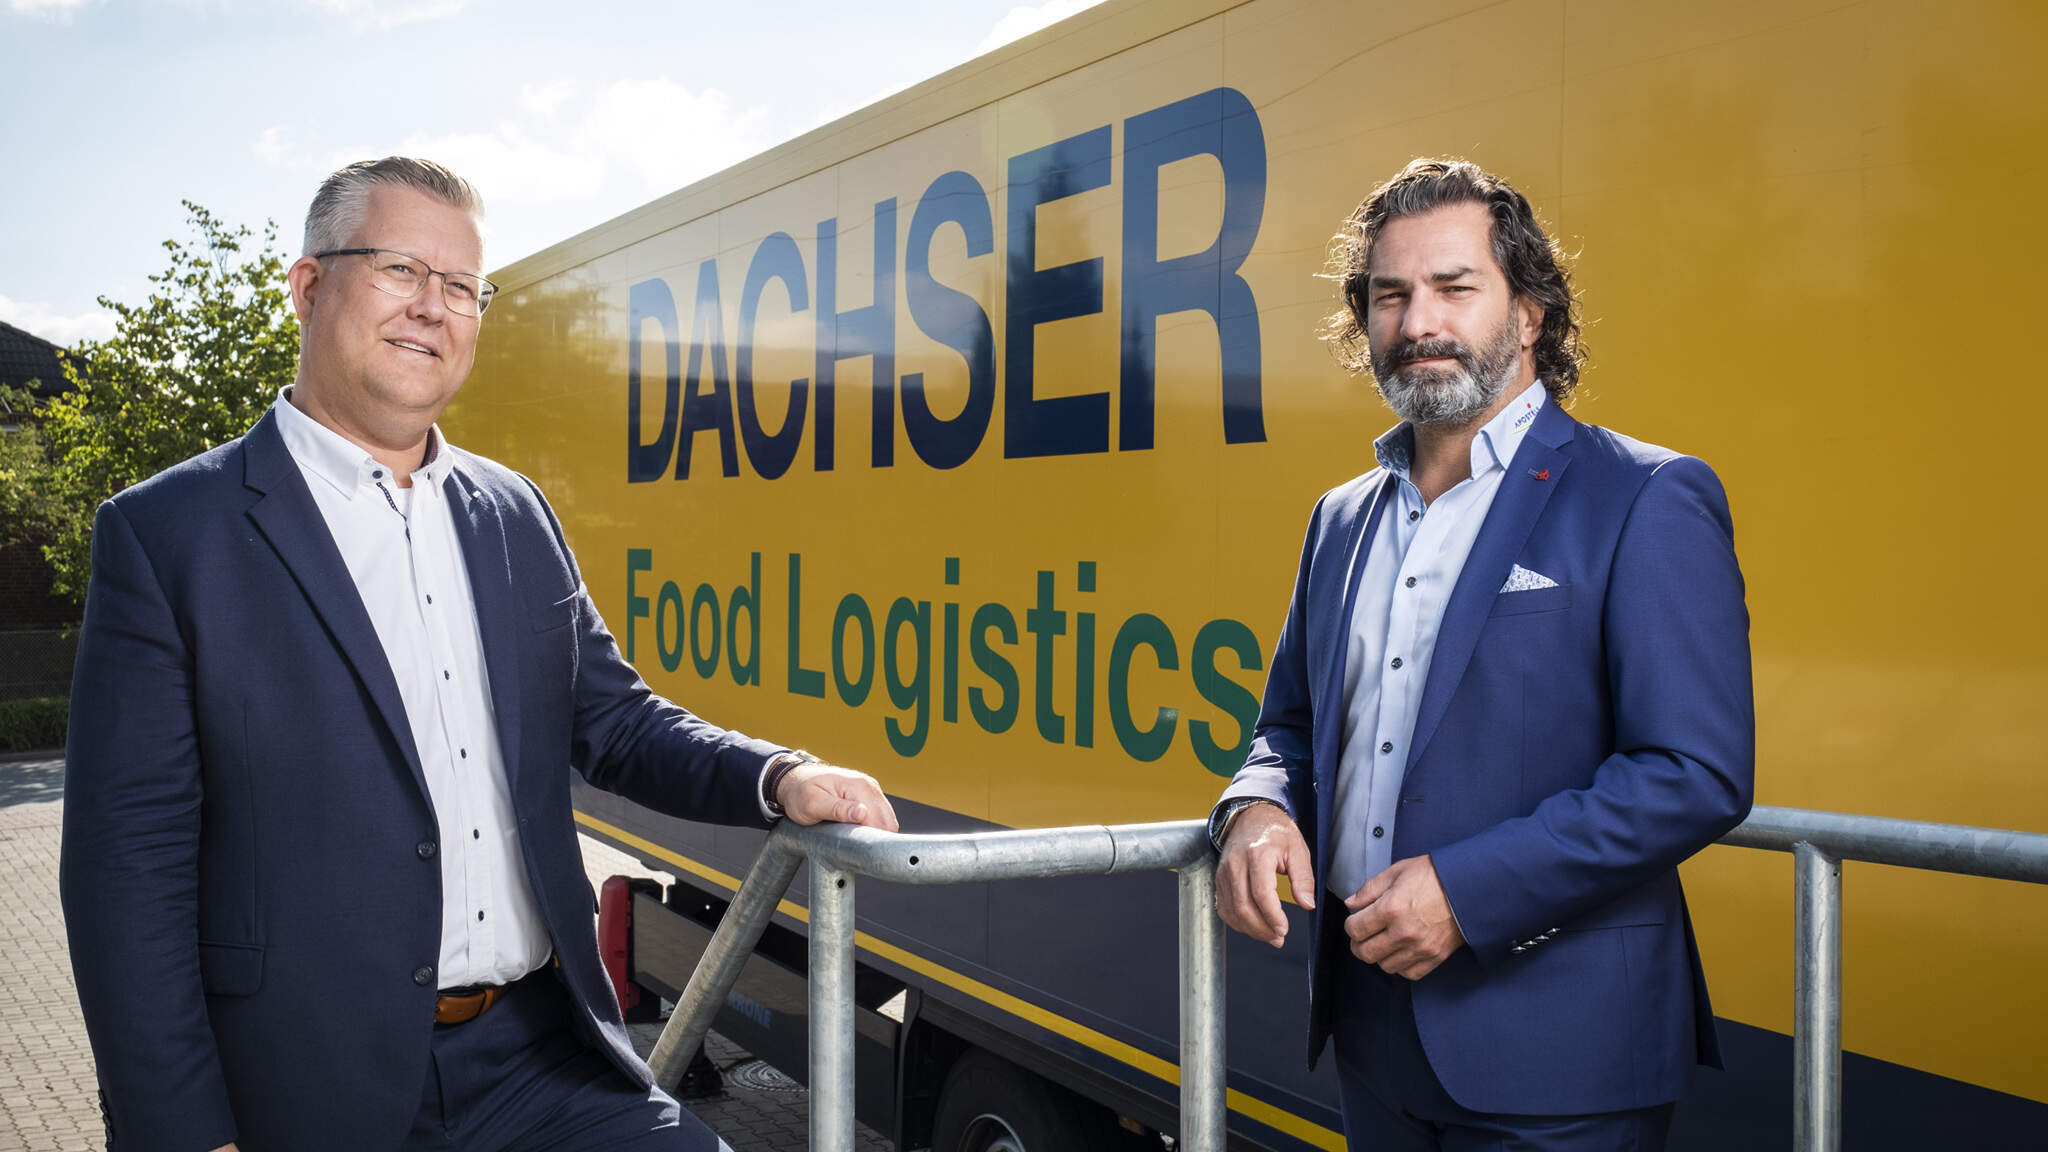 Working hand-in-hand: Oliver-Patrick Müller, Sales Manager DACHSER Food Logistics at DACHSER’s logistics center Hannover (left), and Konstantinos Kourkoutas, Head of IT & Administration at Apostel (right).